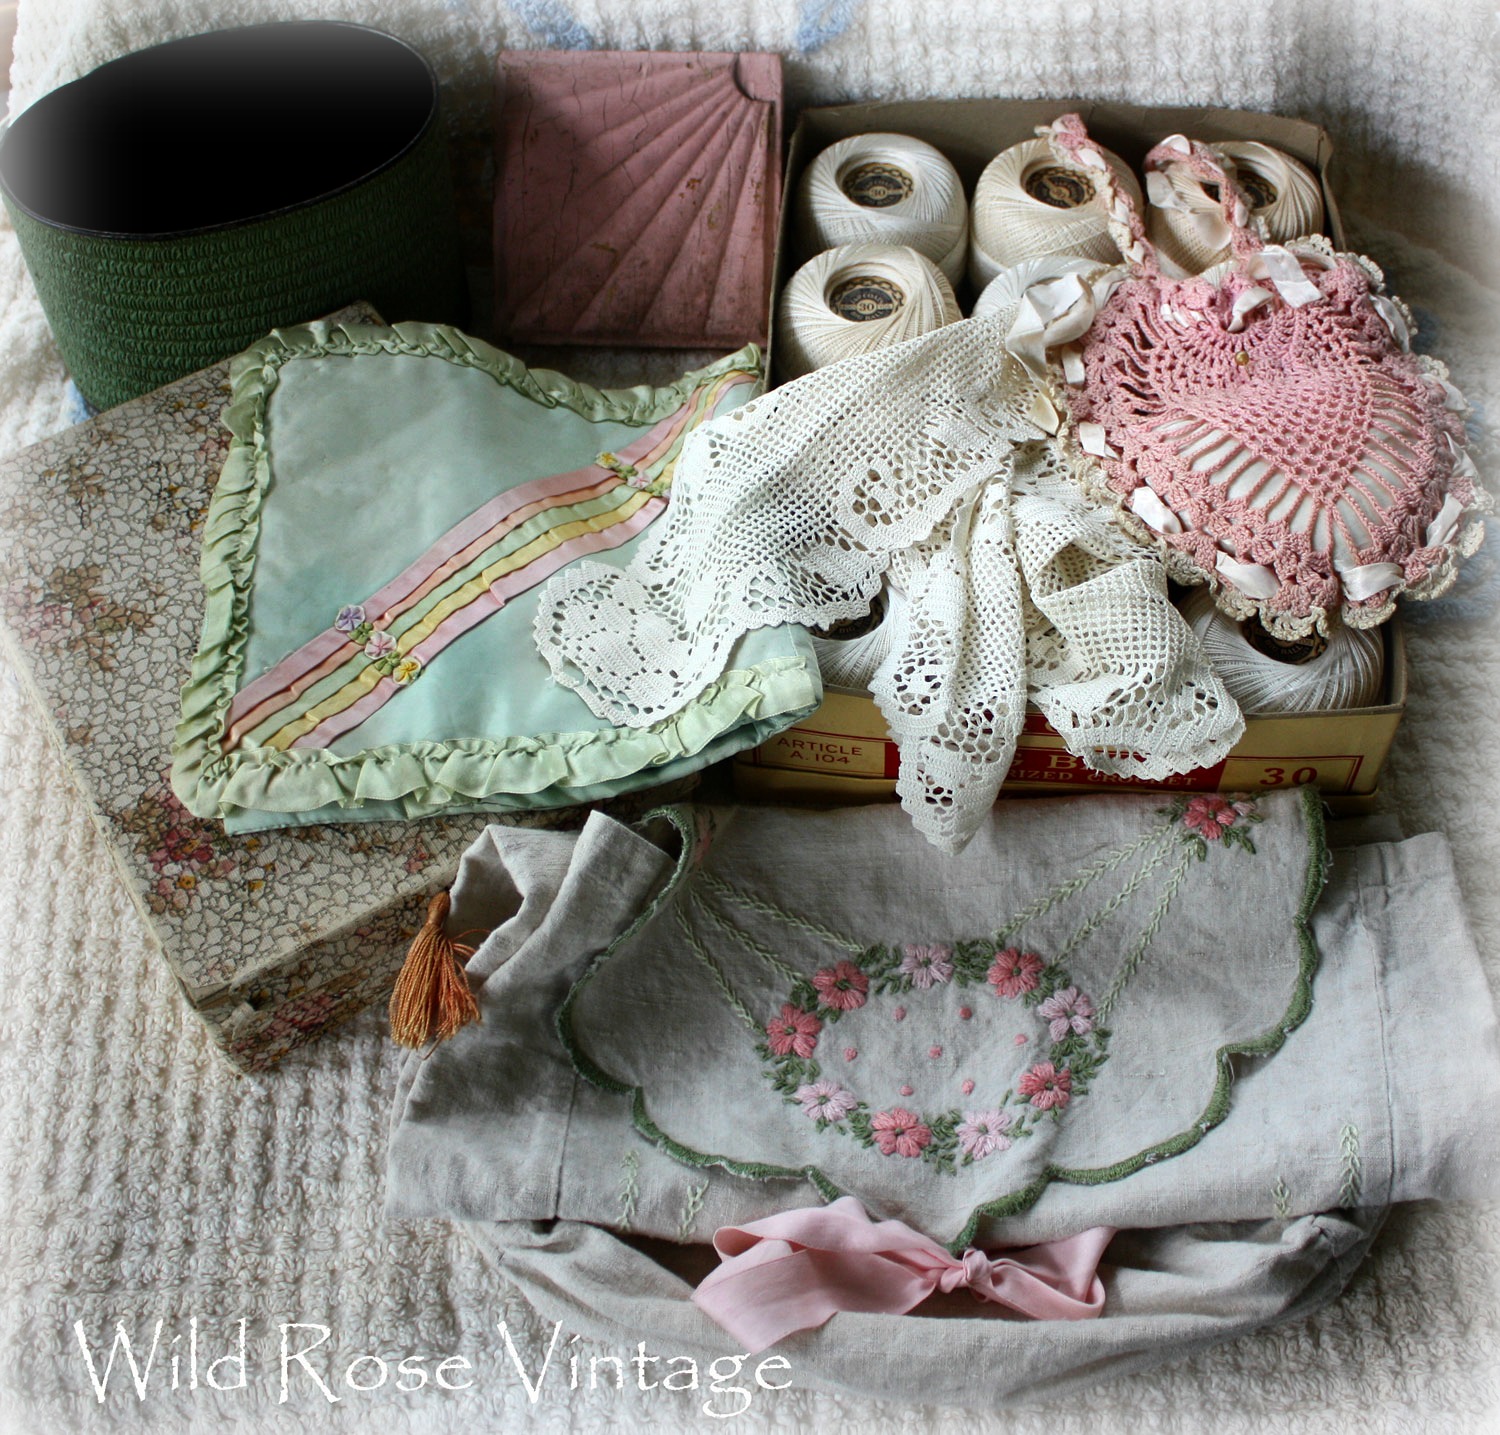 Wild Rose Vintage: Vintage Finds in Cream, Pink and Green...and a ...